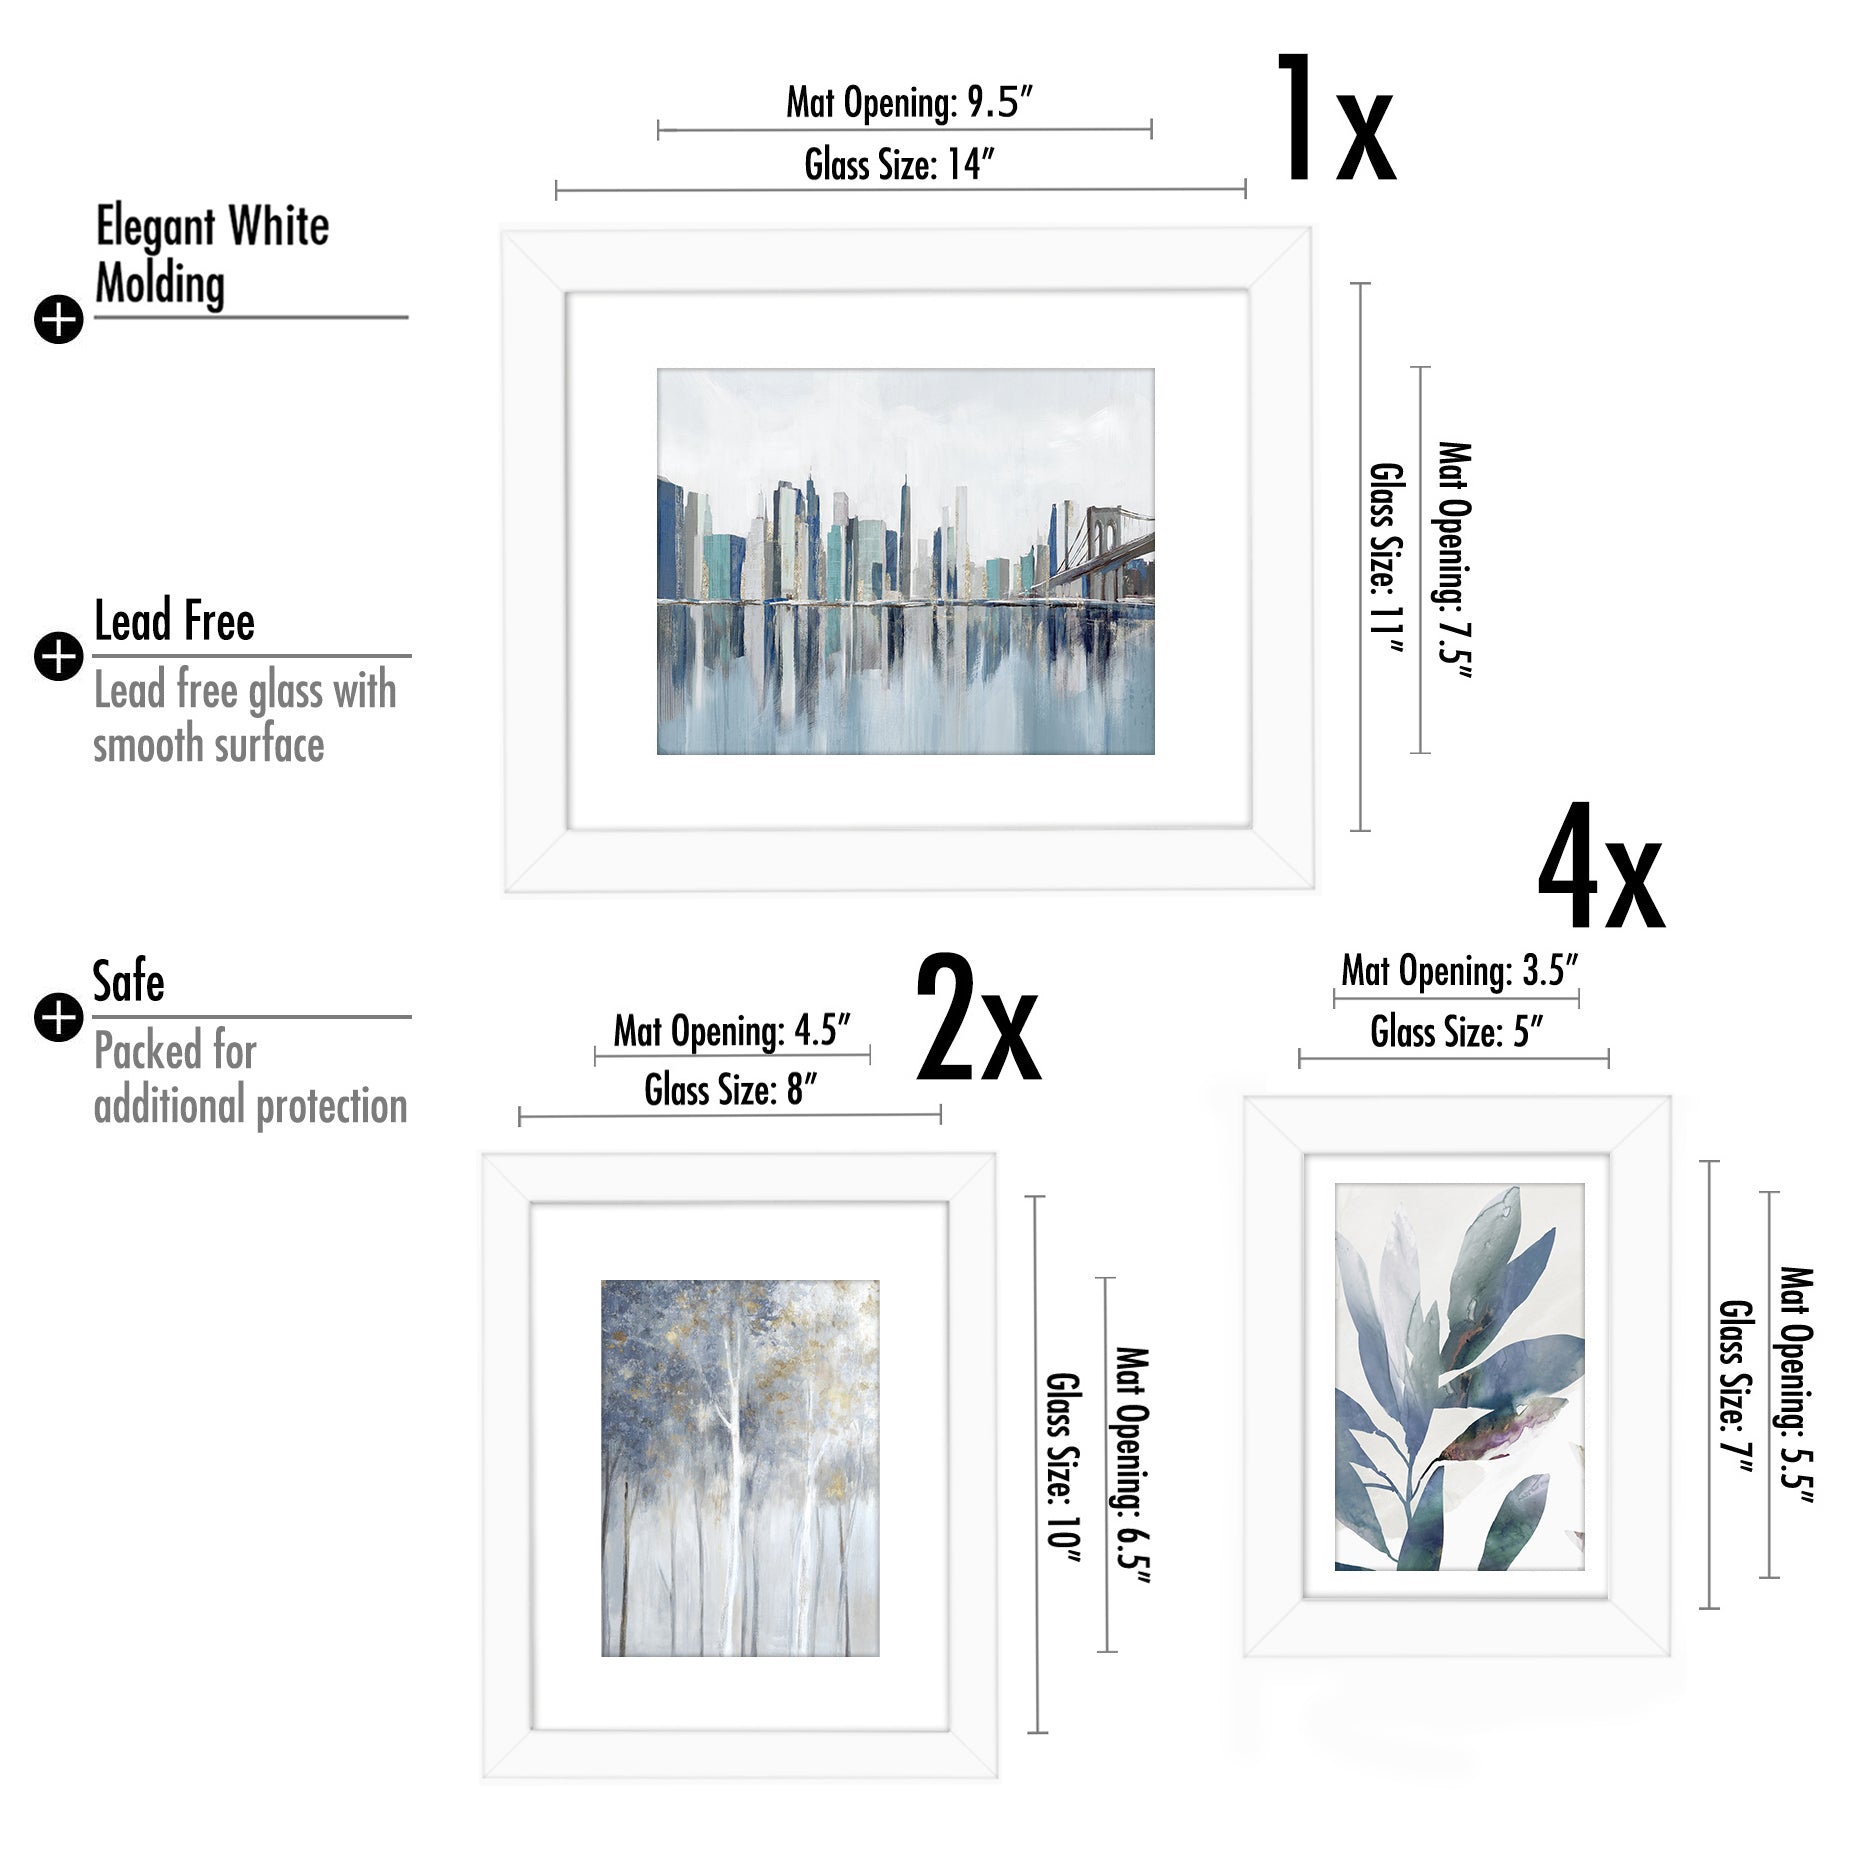 9-Piece Brushed Silver 4x6 Gallery Wall Picture Frame Set + Reviews